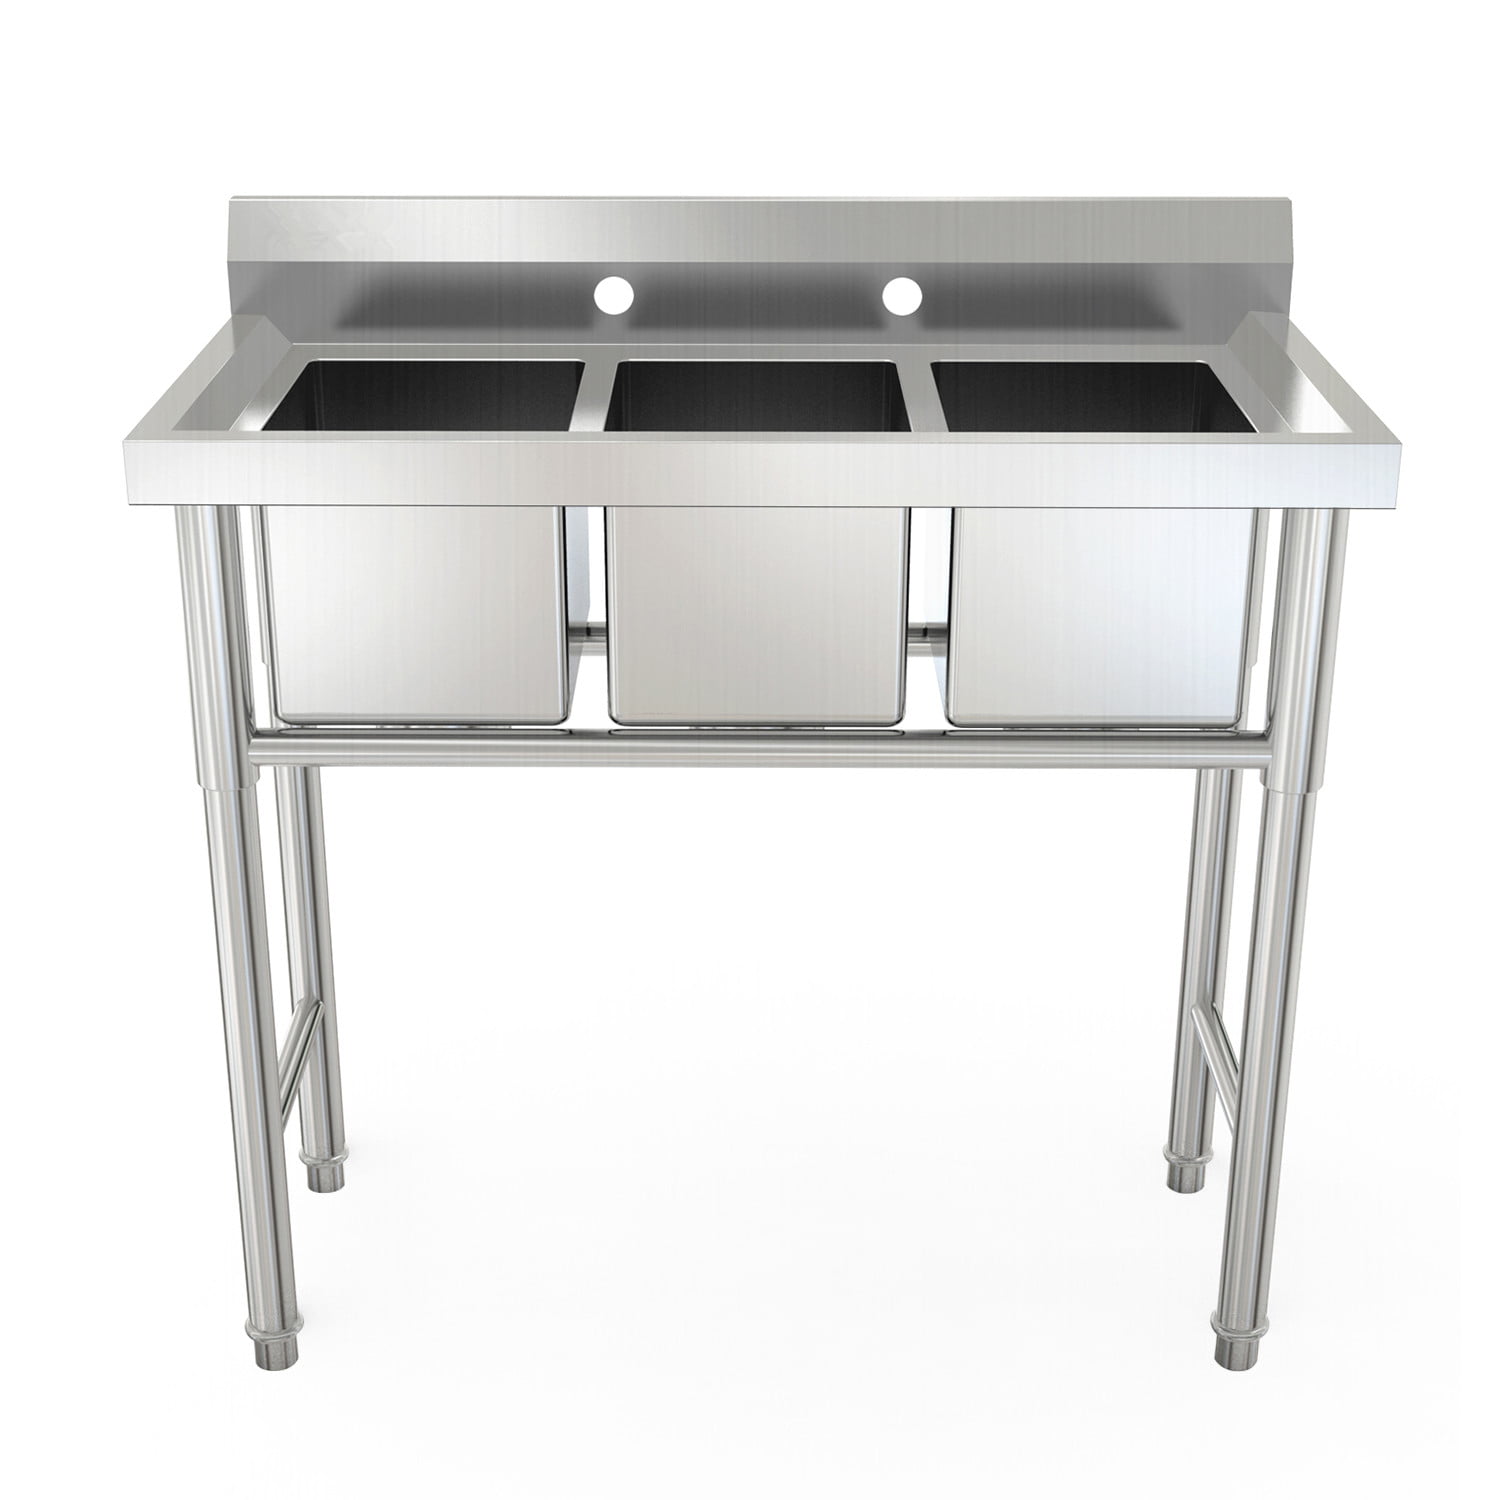 Zimtown 39" Wide Heavy Duty 3 Compartment Commercial Stainless Steel Sink